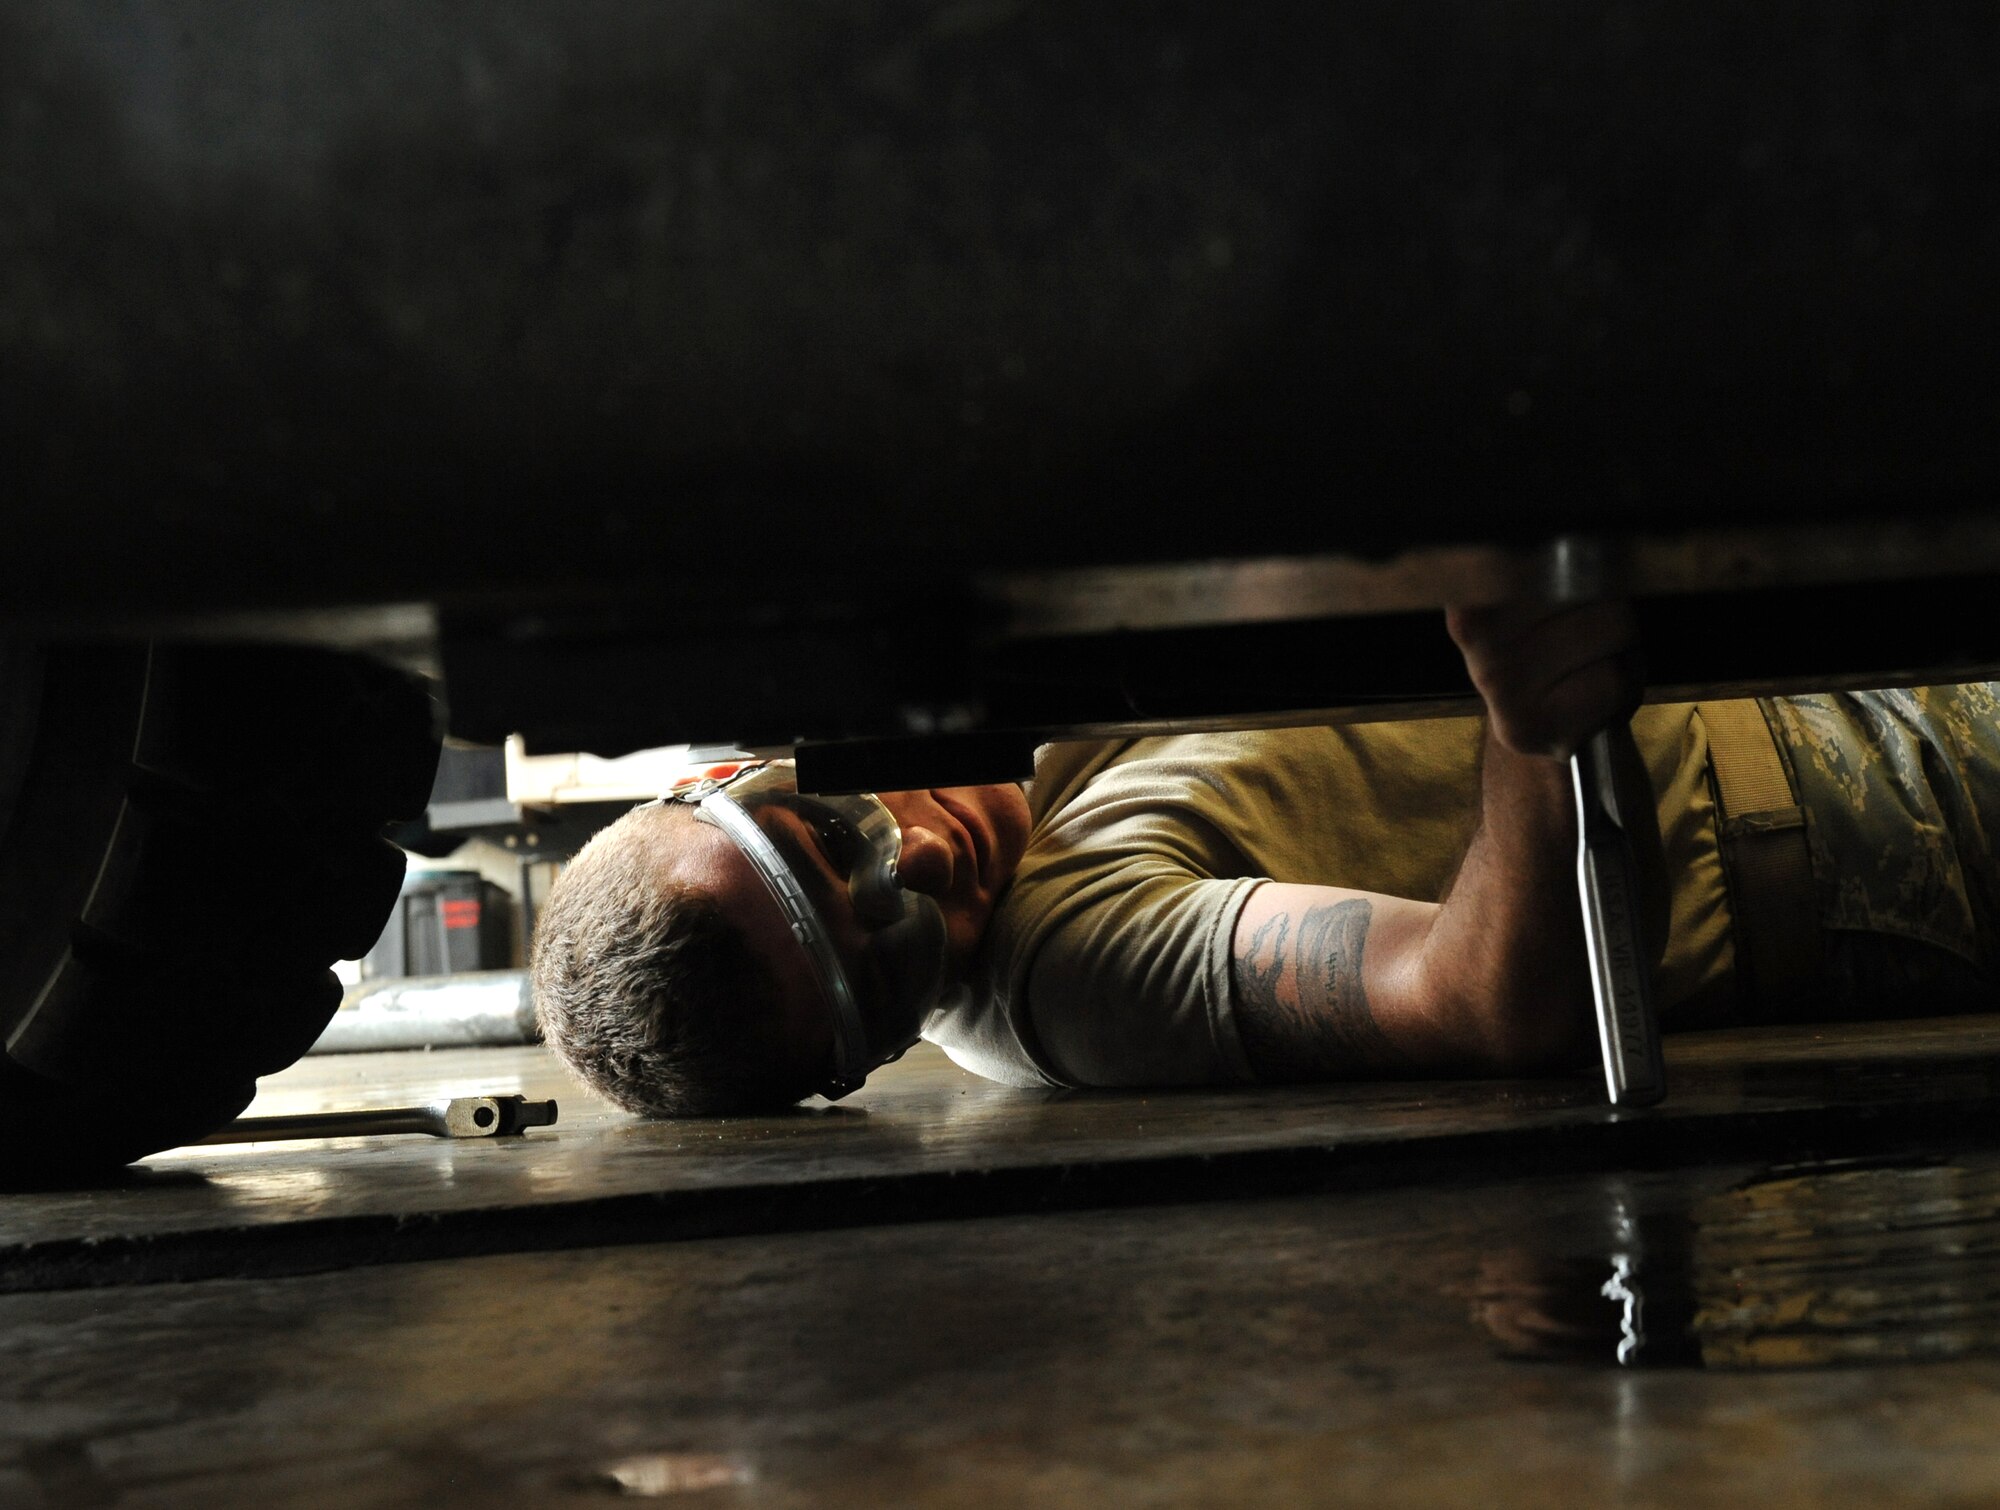 Airman 1st Class Cody Akers, 2nd Logistics Readiness Squadron Vehicle Maintenance lube rack technician, tightens an oil drain plug underneath a vehicle on Barksdale Air Force Base, La., Oct. 24. Lube rack technicians perform oil changes, filter changes and inspect the vehicles' fluid systems. (U.S. Air Force photo/Airman 1st Class Benjamin Gonsier)(RELEASED)

